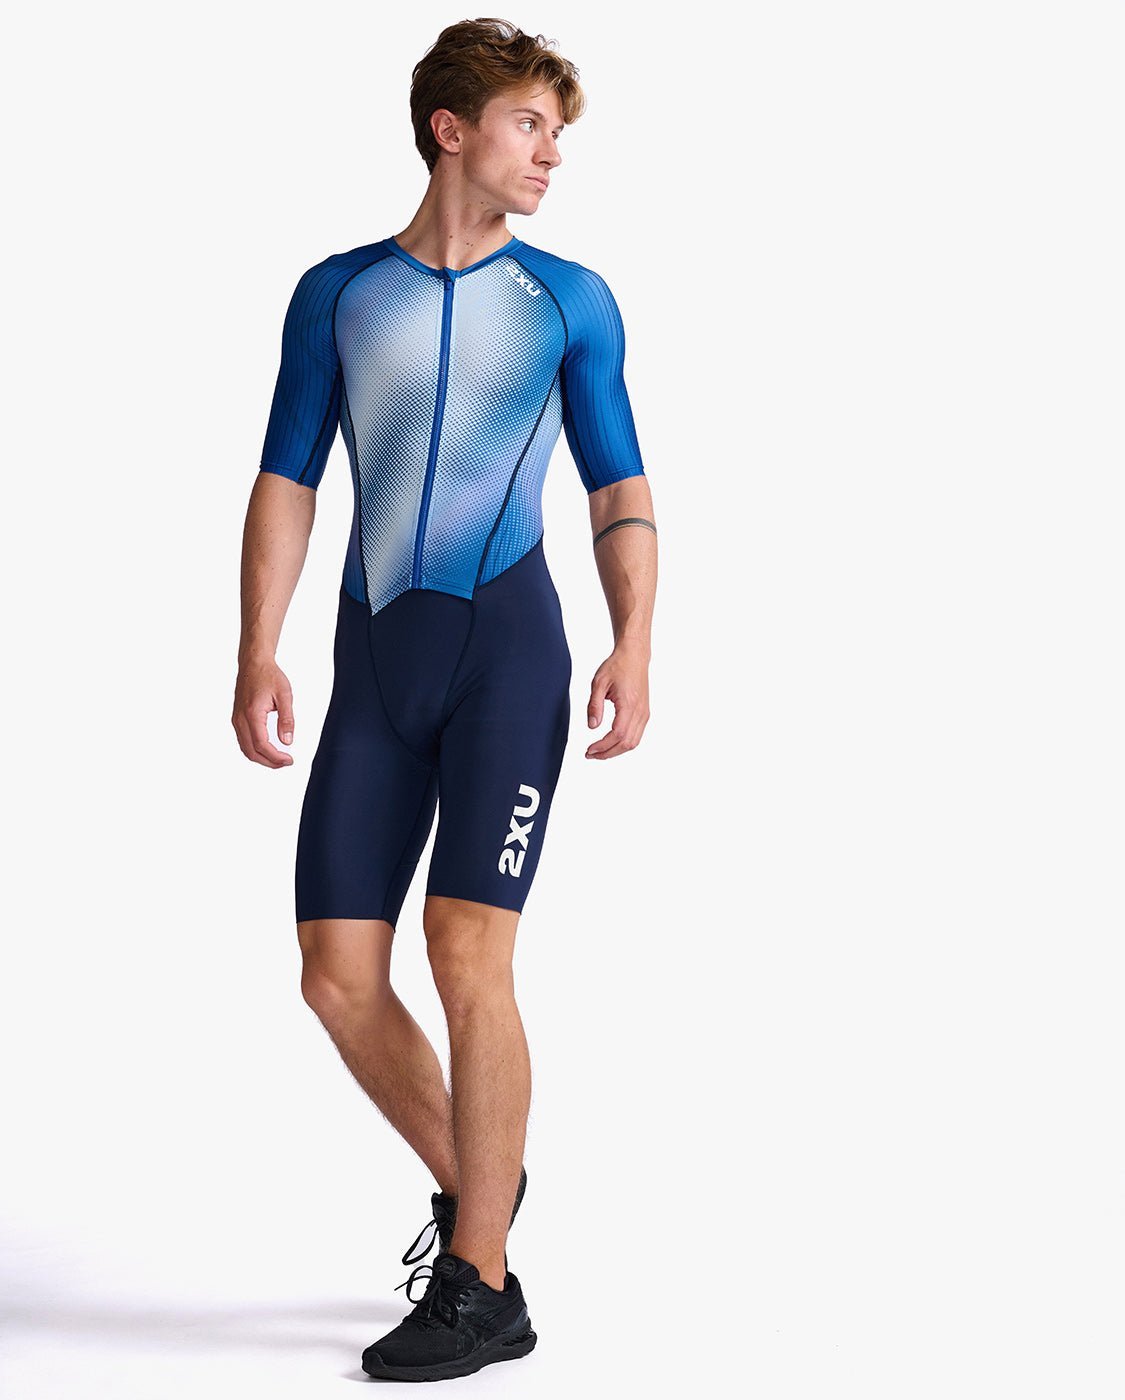 2XU South Africa - Mens Aero Sleeved Trisuit - Midnight/White